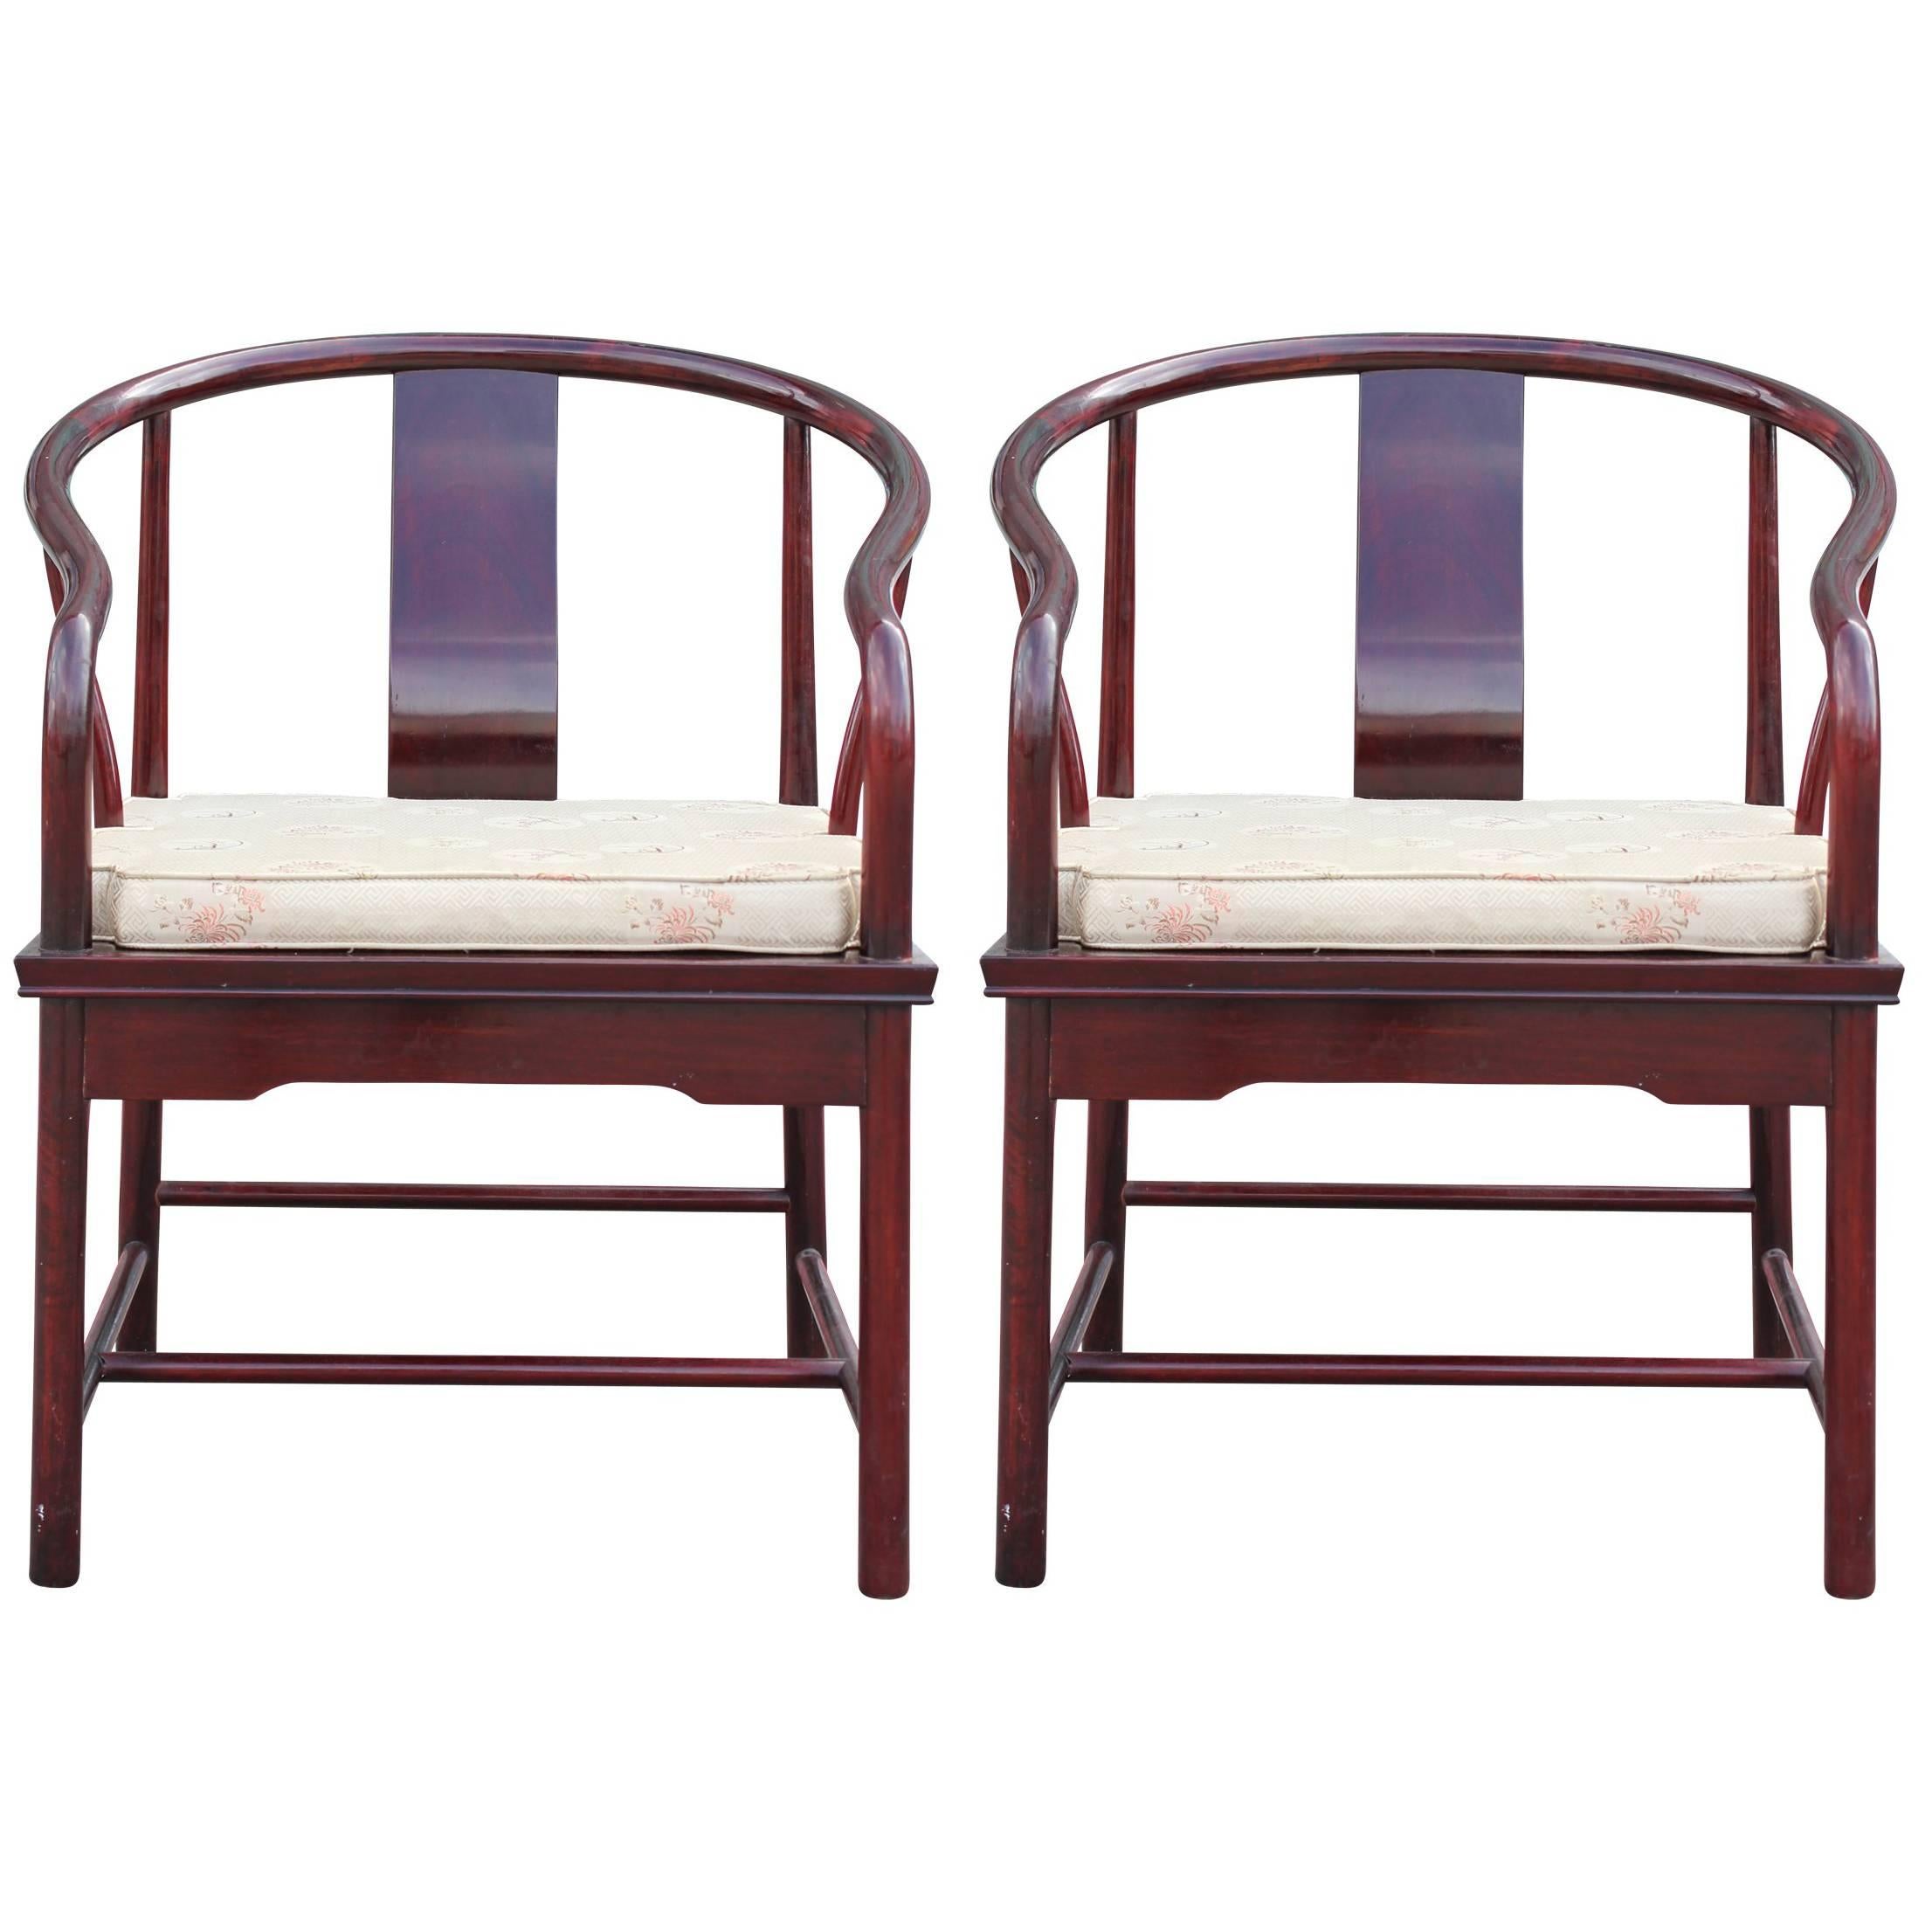 Pair of Asian Michael Taylor for Baker Style Horseshoe Lounge Chairs in Cream